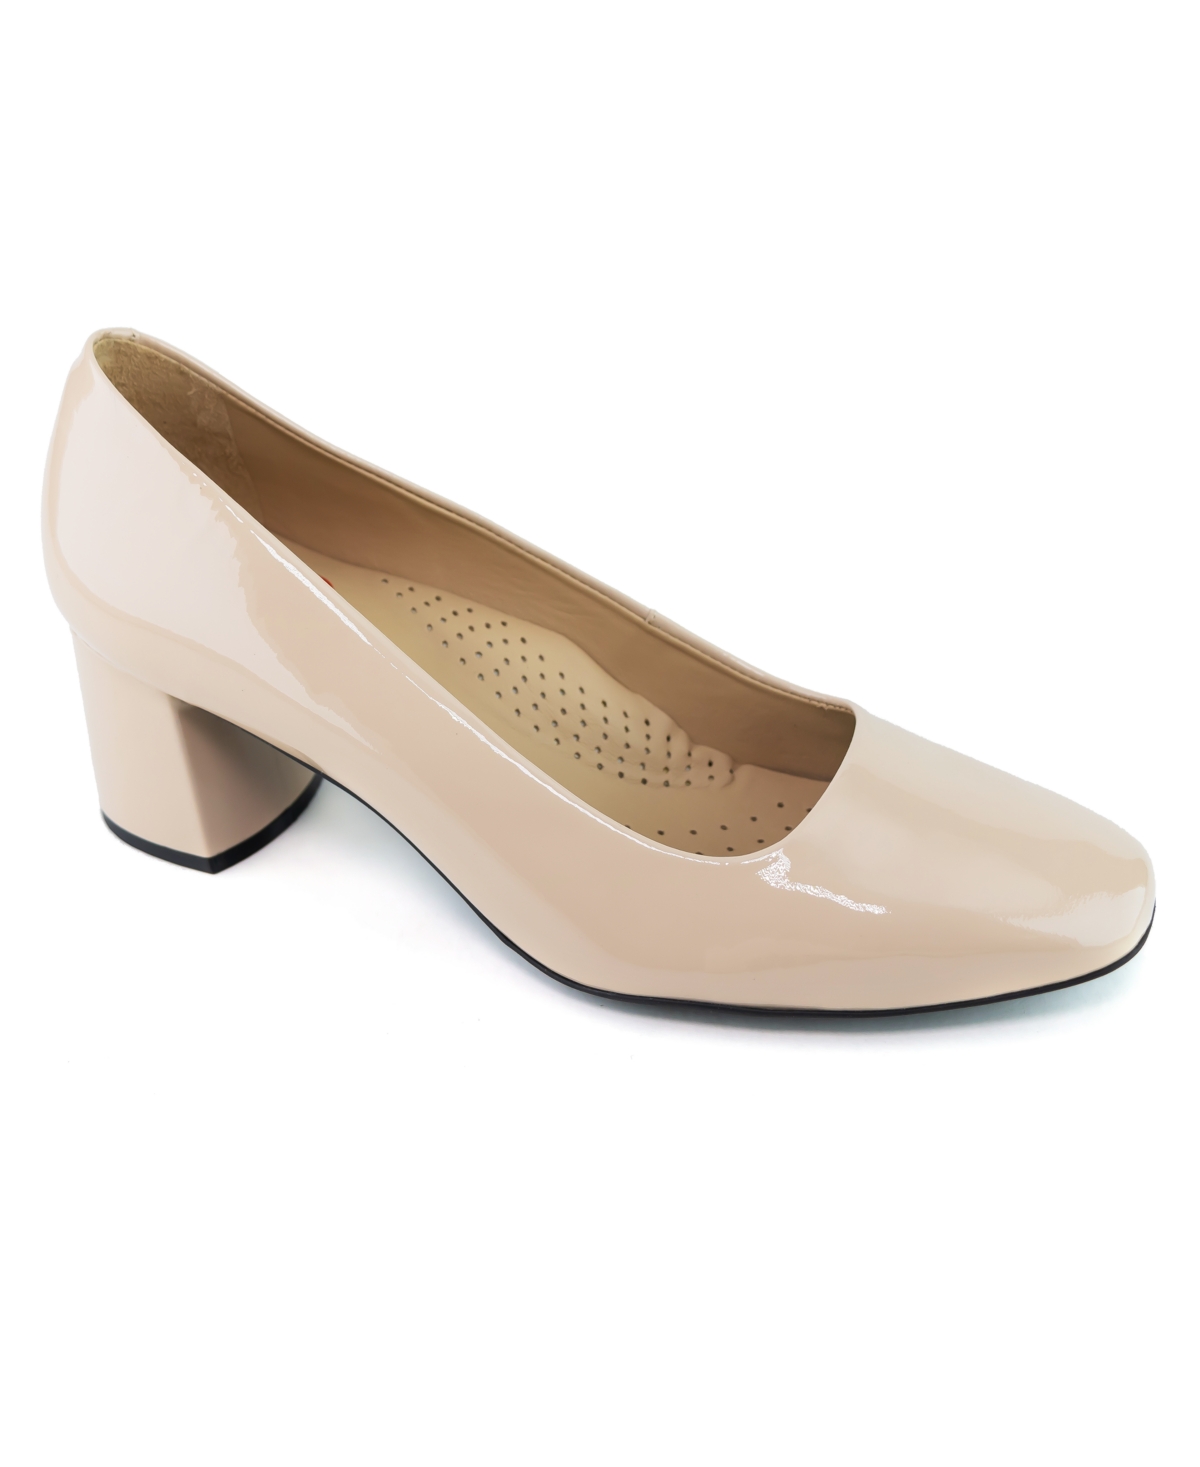 Ashley Street Leather Pumps - Nude